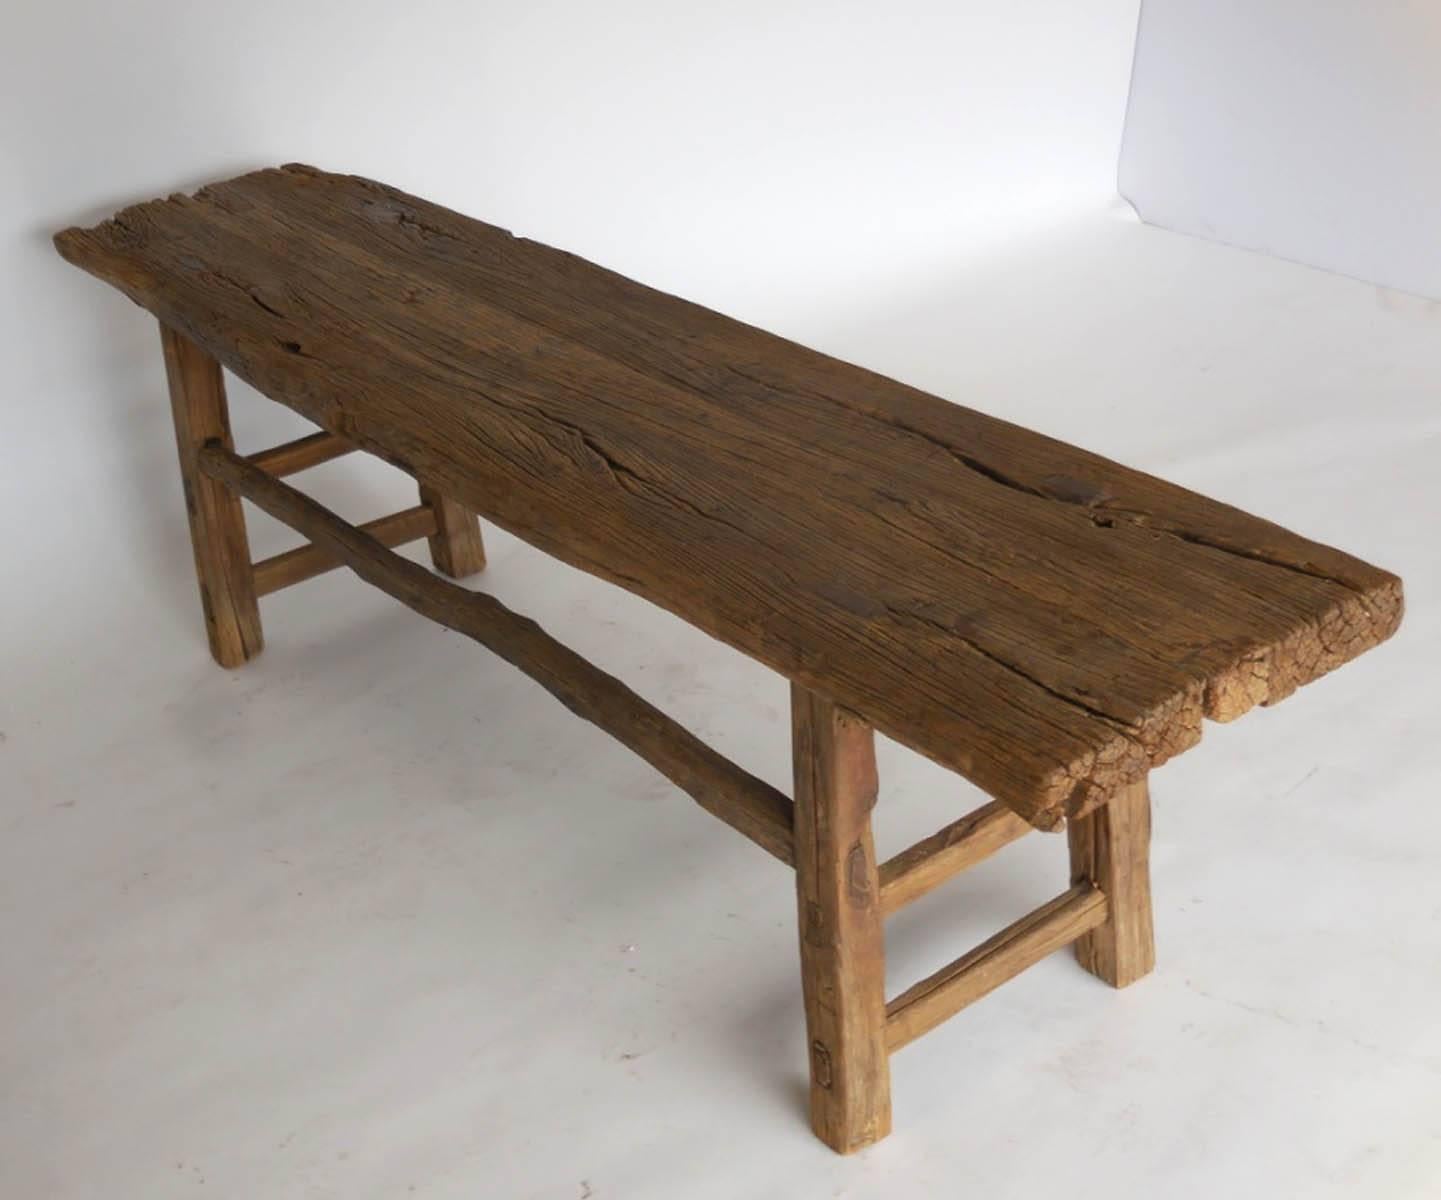 Beautiful Elm bench with natural branch stretchers. Mortise and tenon construction, beautiful old wood. Sturdy and functional.